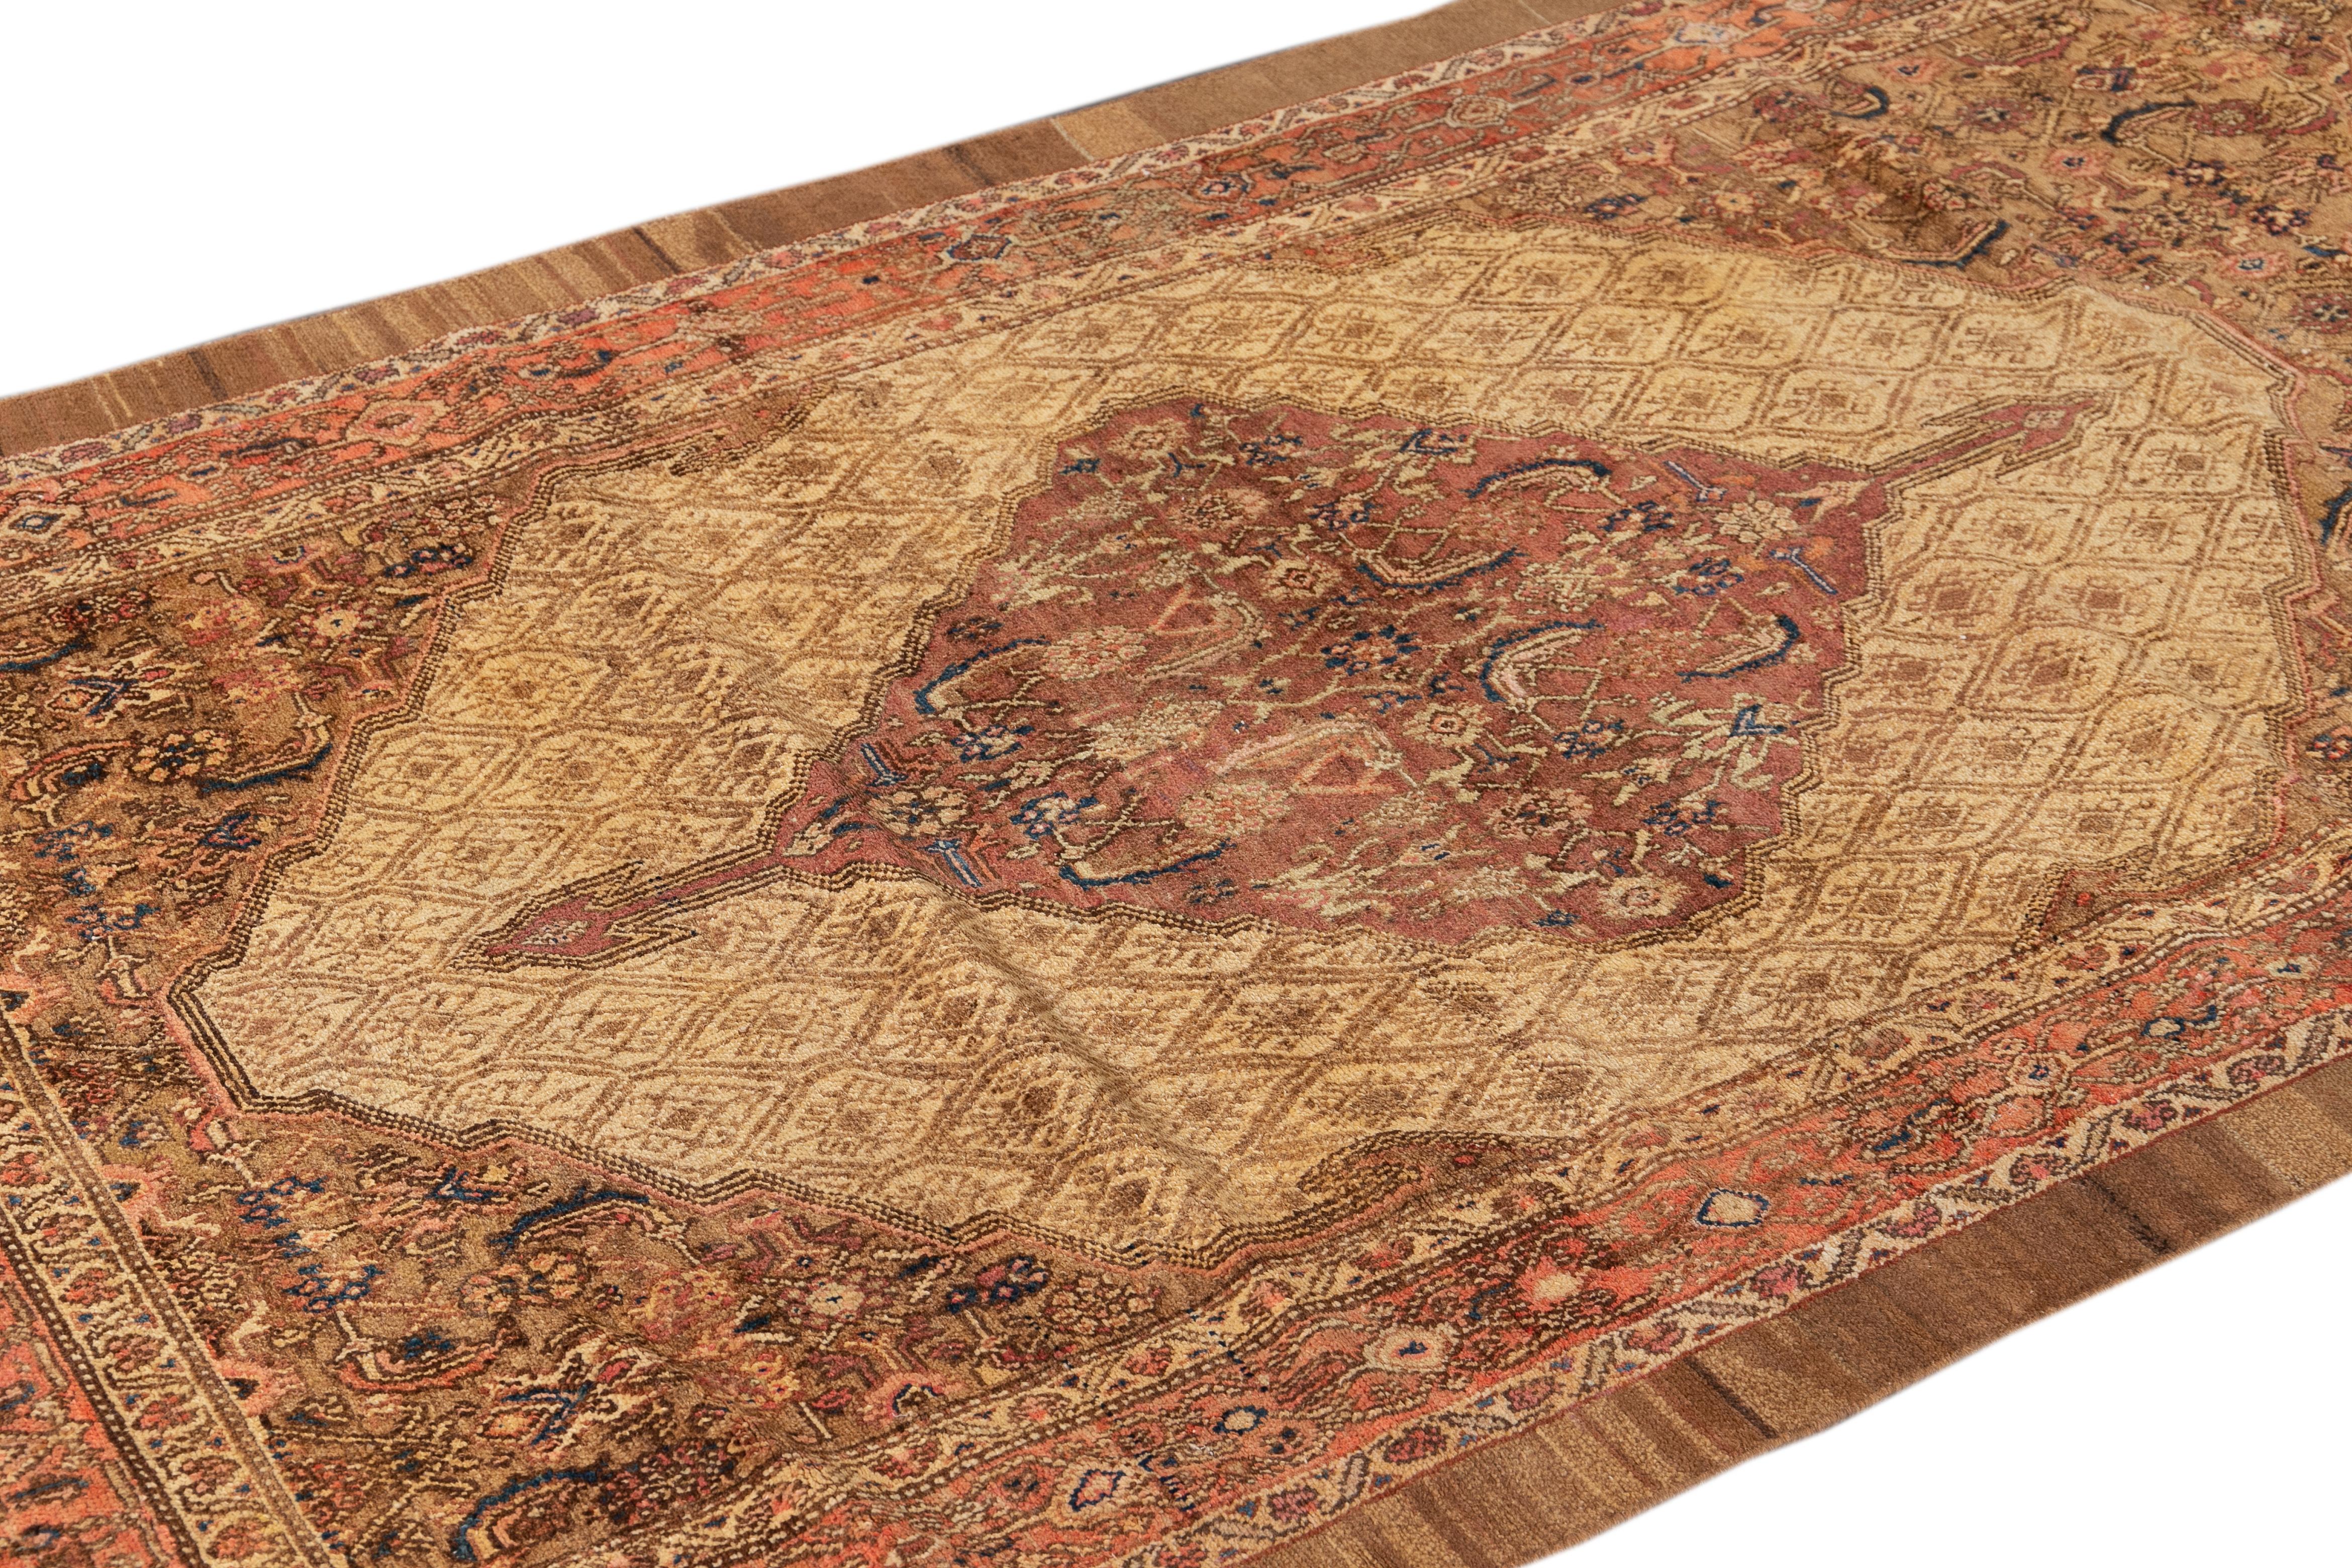 Beautiful 20th-century Malayer hand-knotted long wool runner with a tan field. This Antique piece has brown and rust accents in a gorgeous all-over medallion design.

This rug measures: 3'10